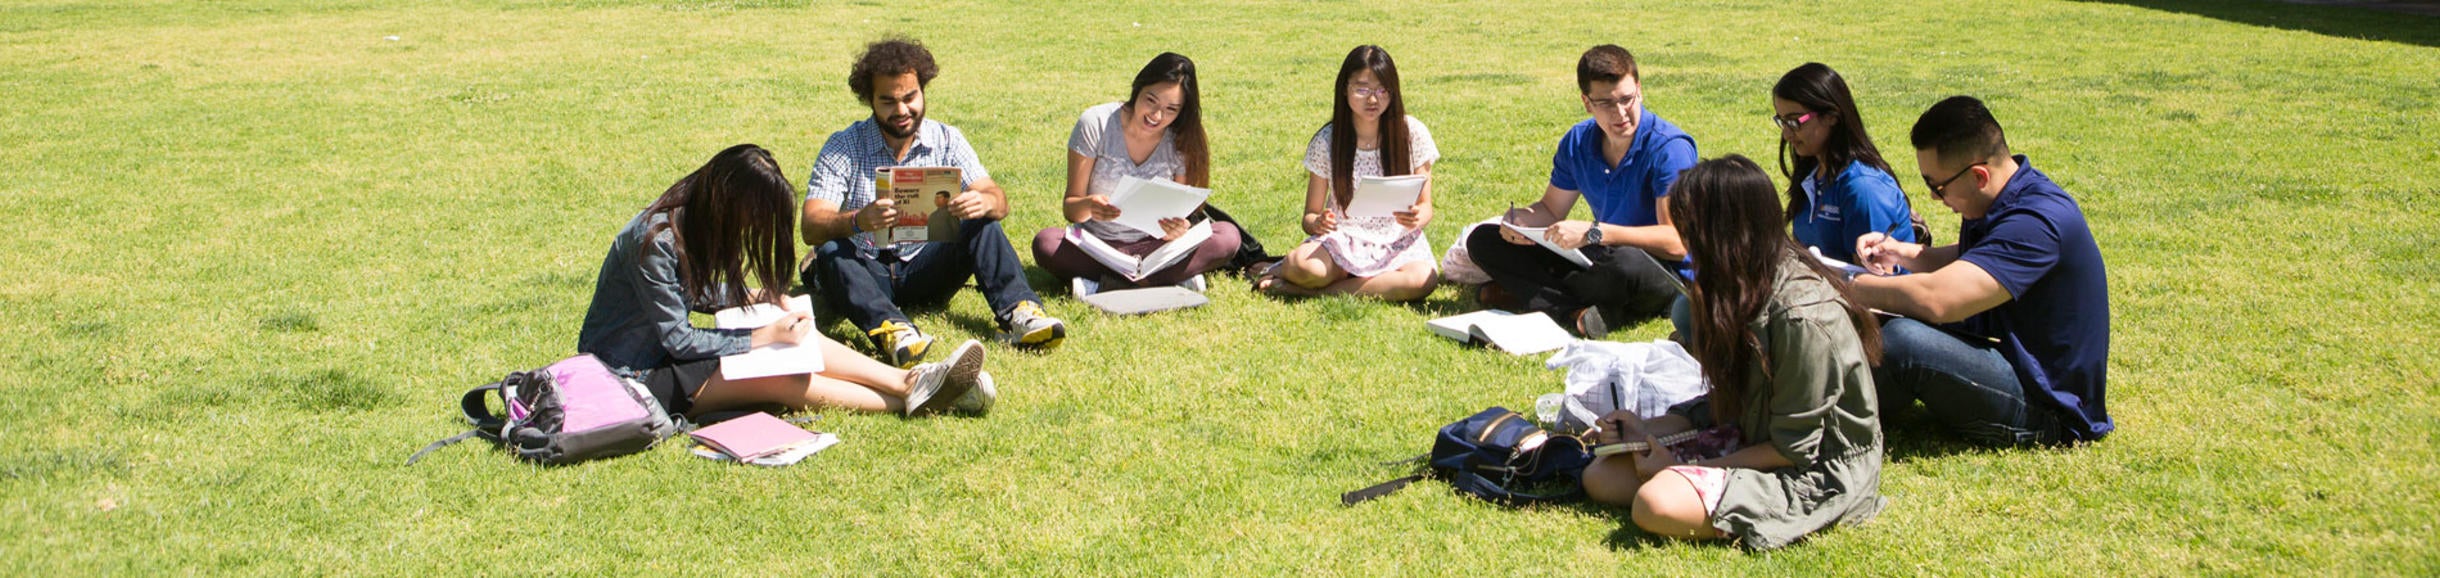 A group of diverse students sitting on a green lawn while studying on a sunnny day.